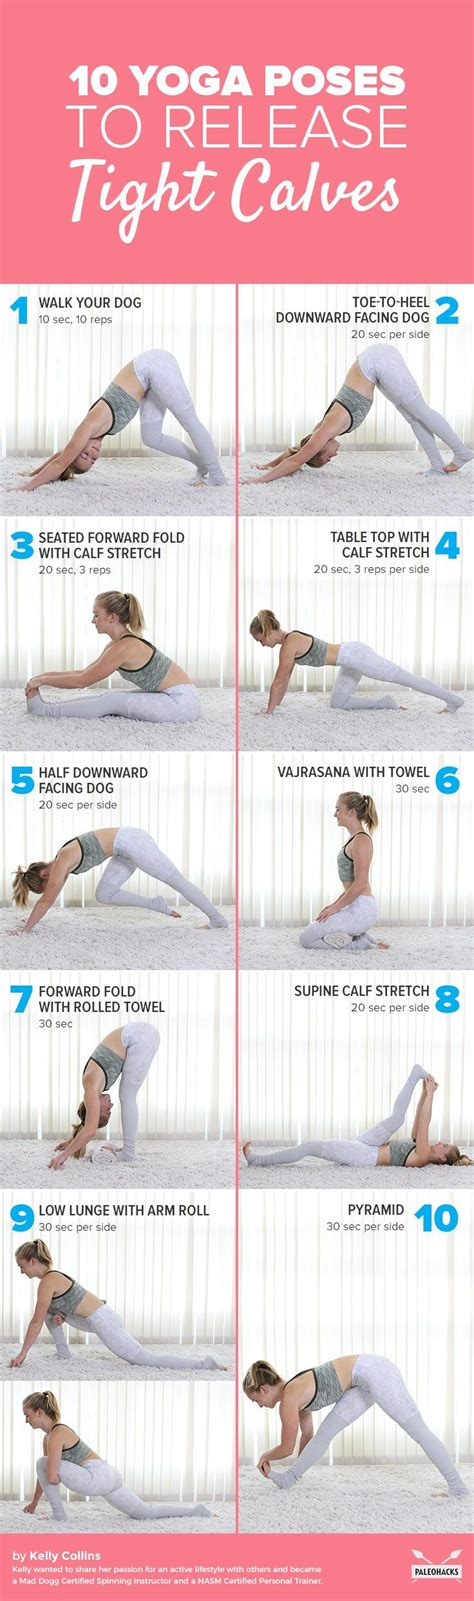 10 Yoga Poses To Release Tight Calves In 2020 Calf Stretches Yoga